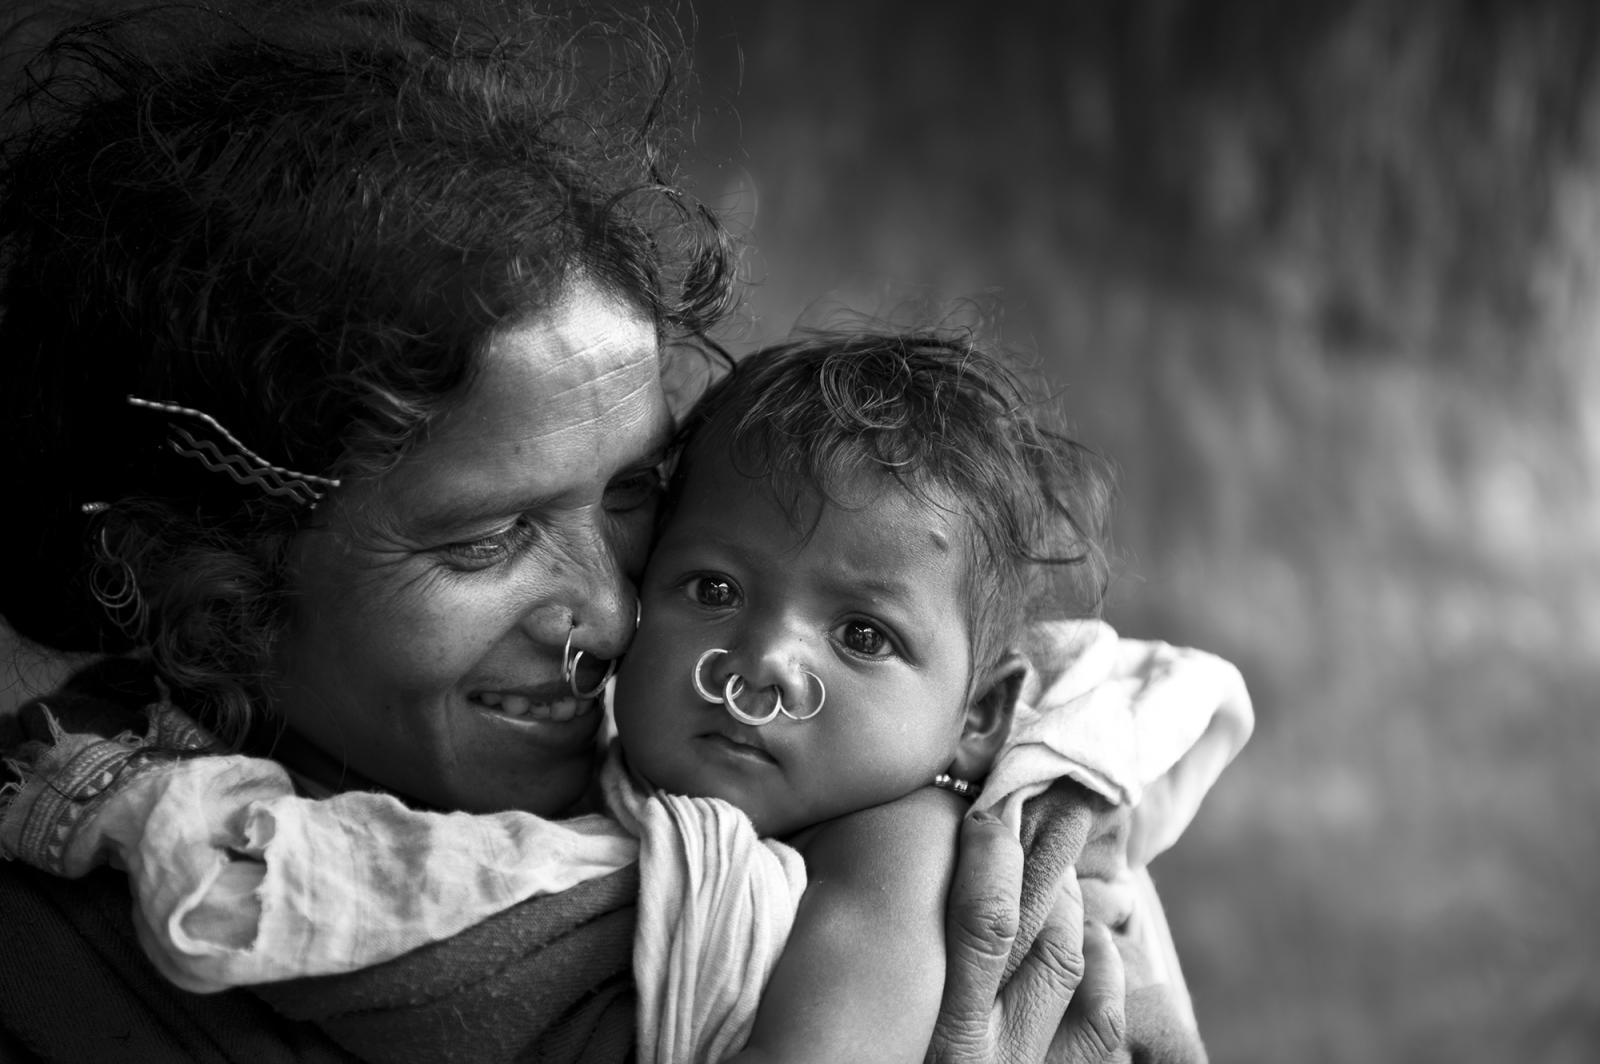 WHEN A MOTHER SMILES, THE WORLD SMILES WITH HER.